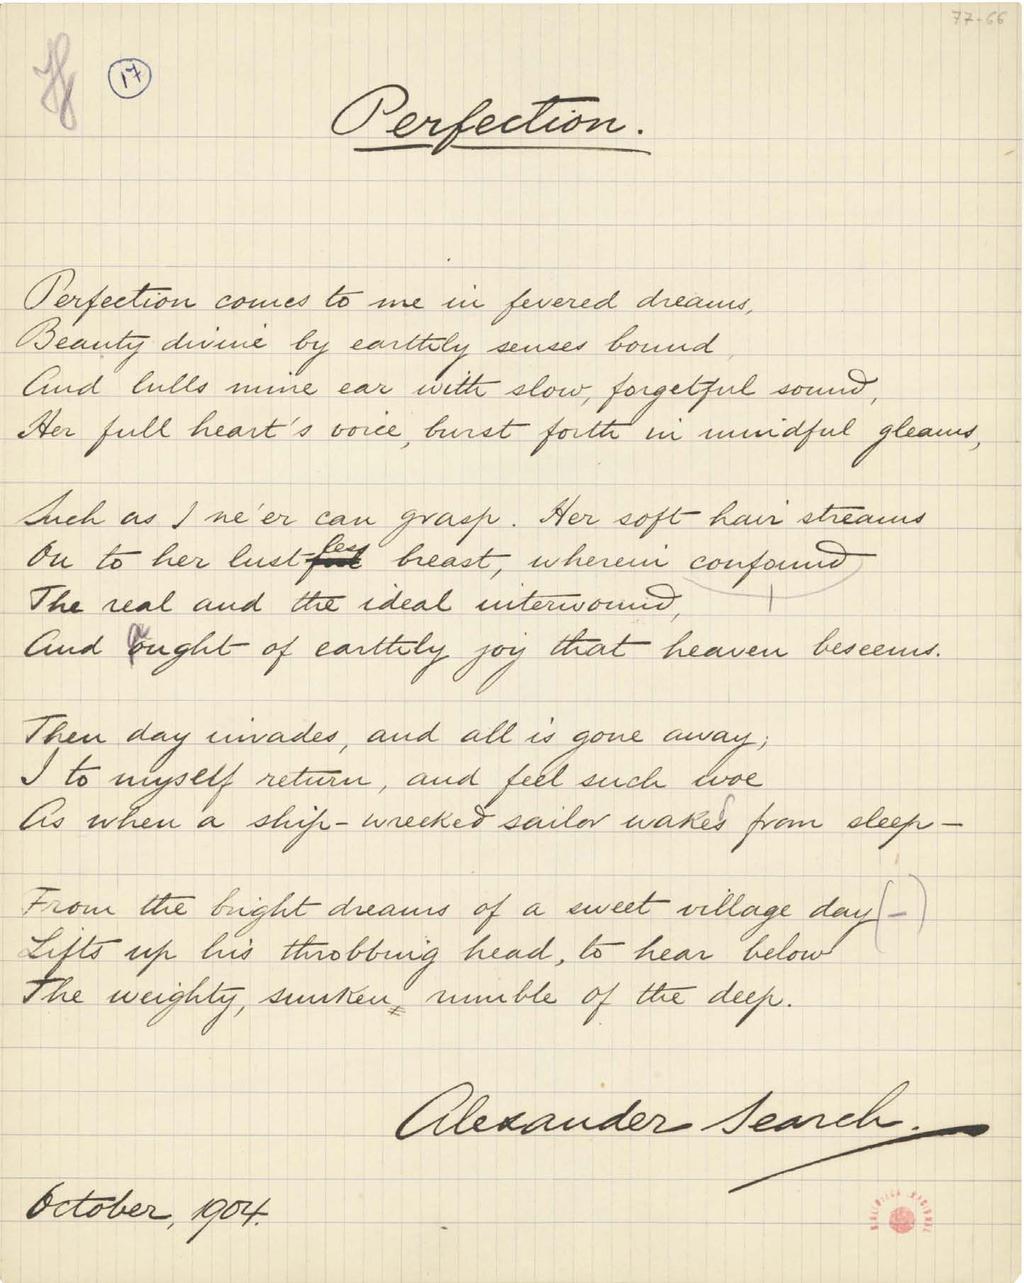 3.16. [77-66 r ]. Dated October, 1904. Written on grid paper in black ink, with emendations in purple pencil, and bearing the signature Alexander Search.